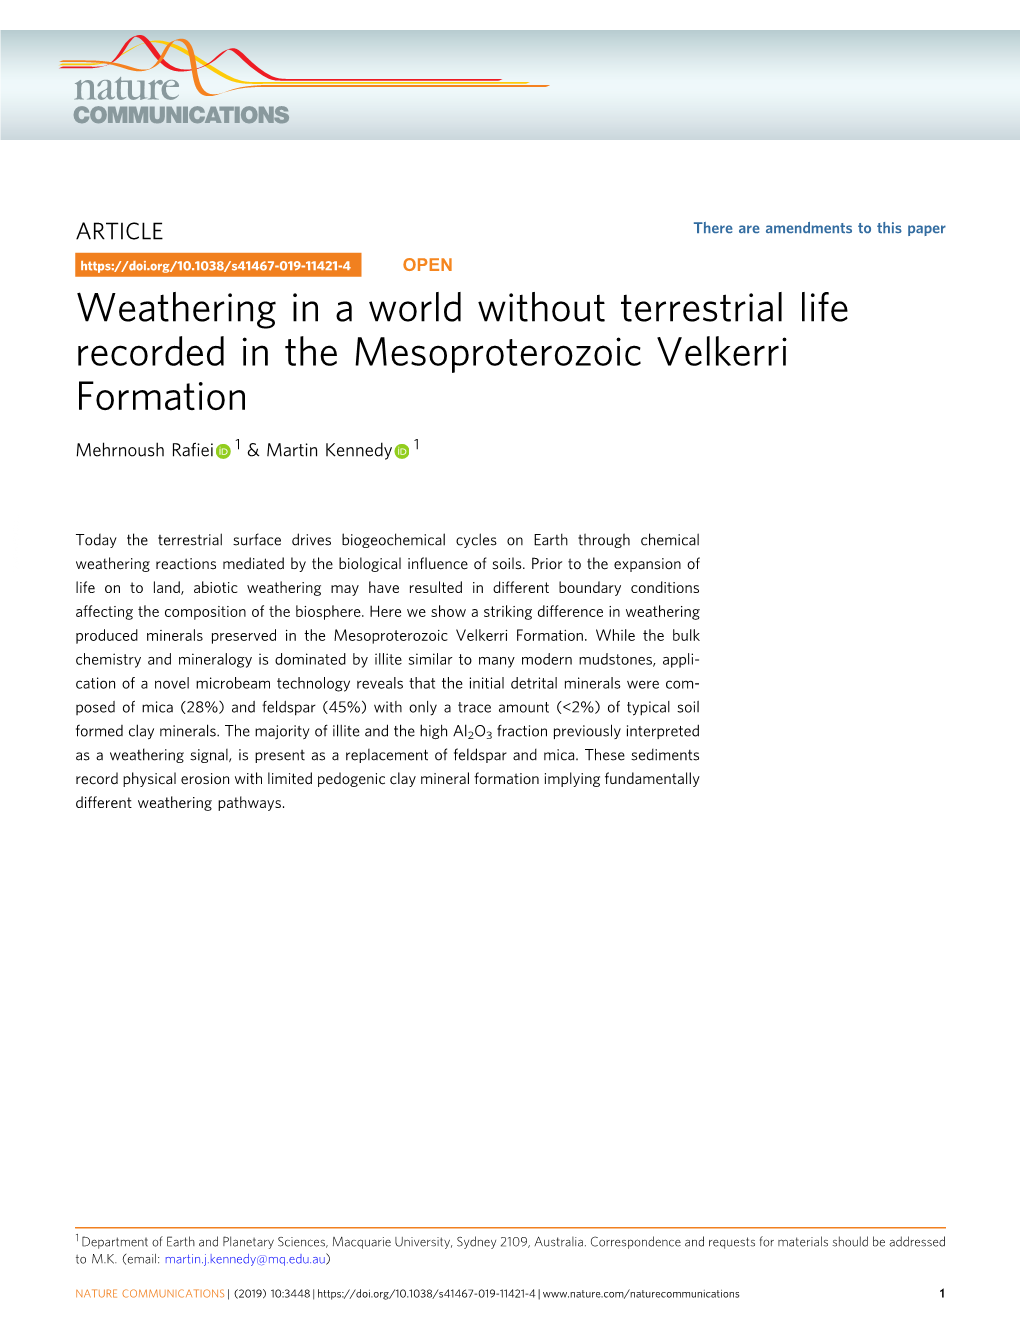 Weathering in a World Without Terrestrial Life Recorded in the Mesoproterozoic Velkerri Formation